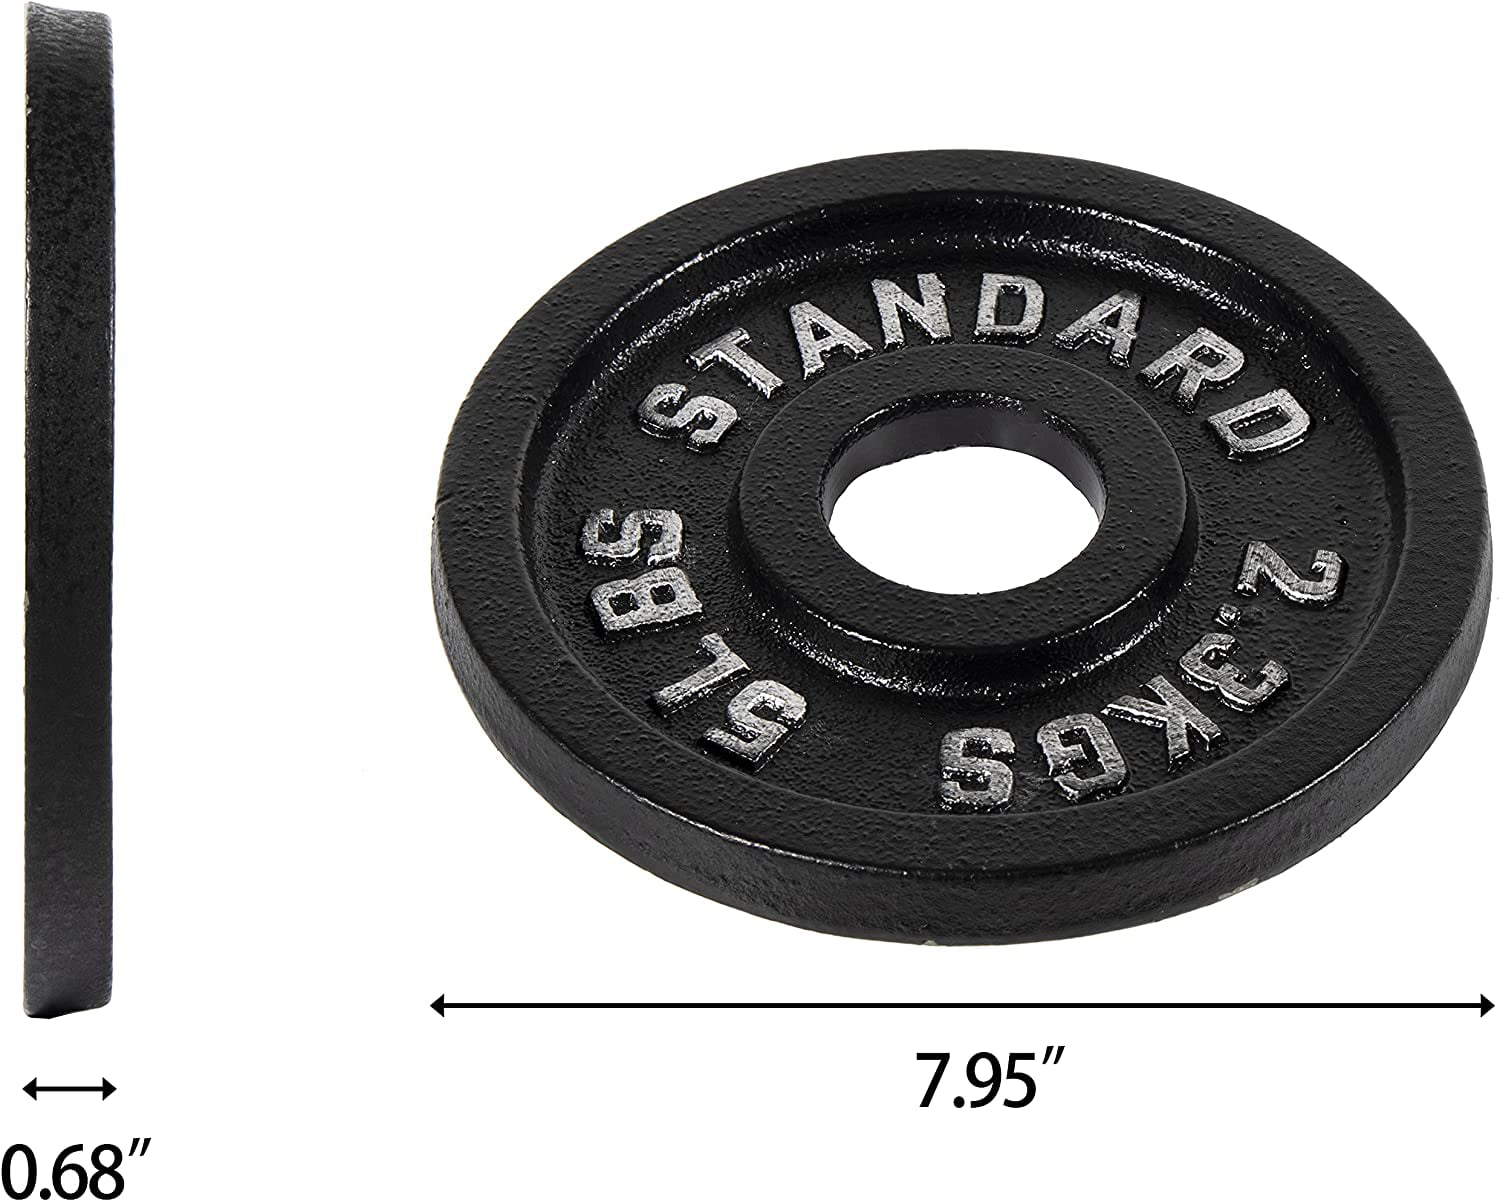 1-Inch Classic Cast Iron Weight Plates 2.5-45 lb, Standard Set of 2 Black